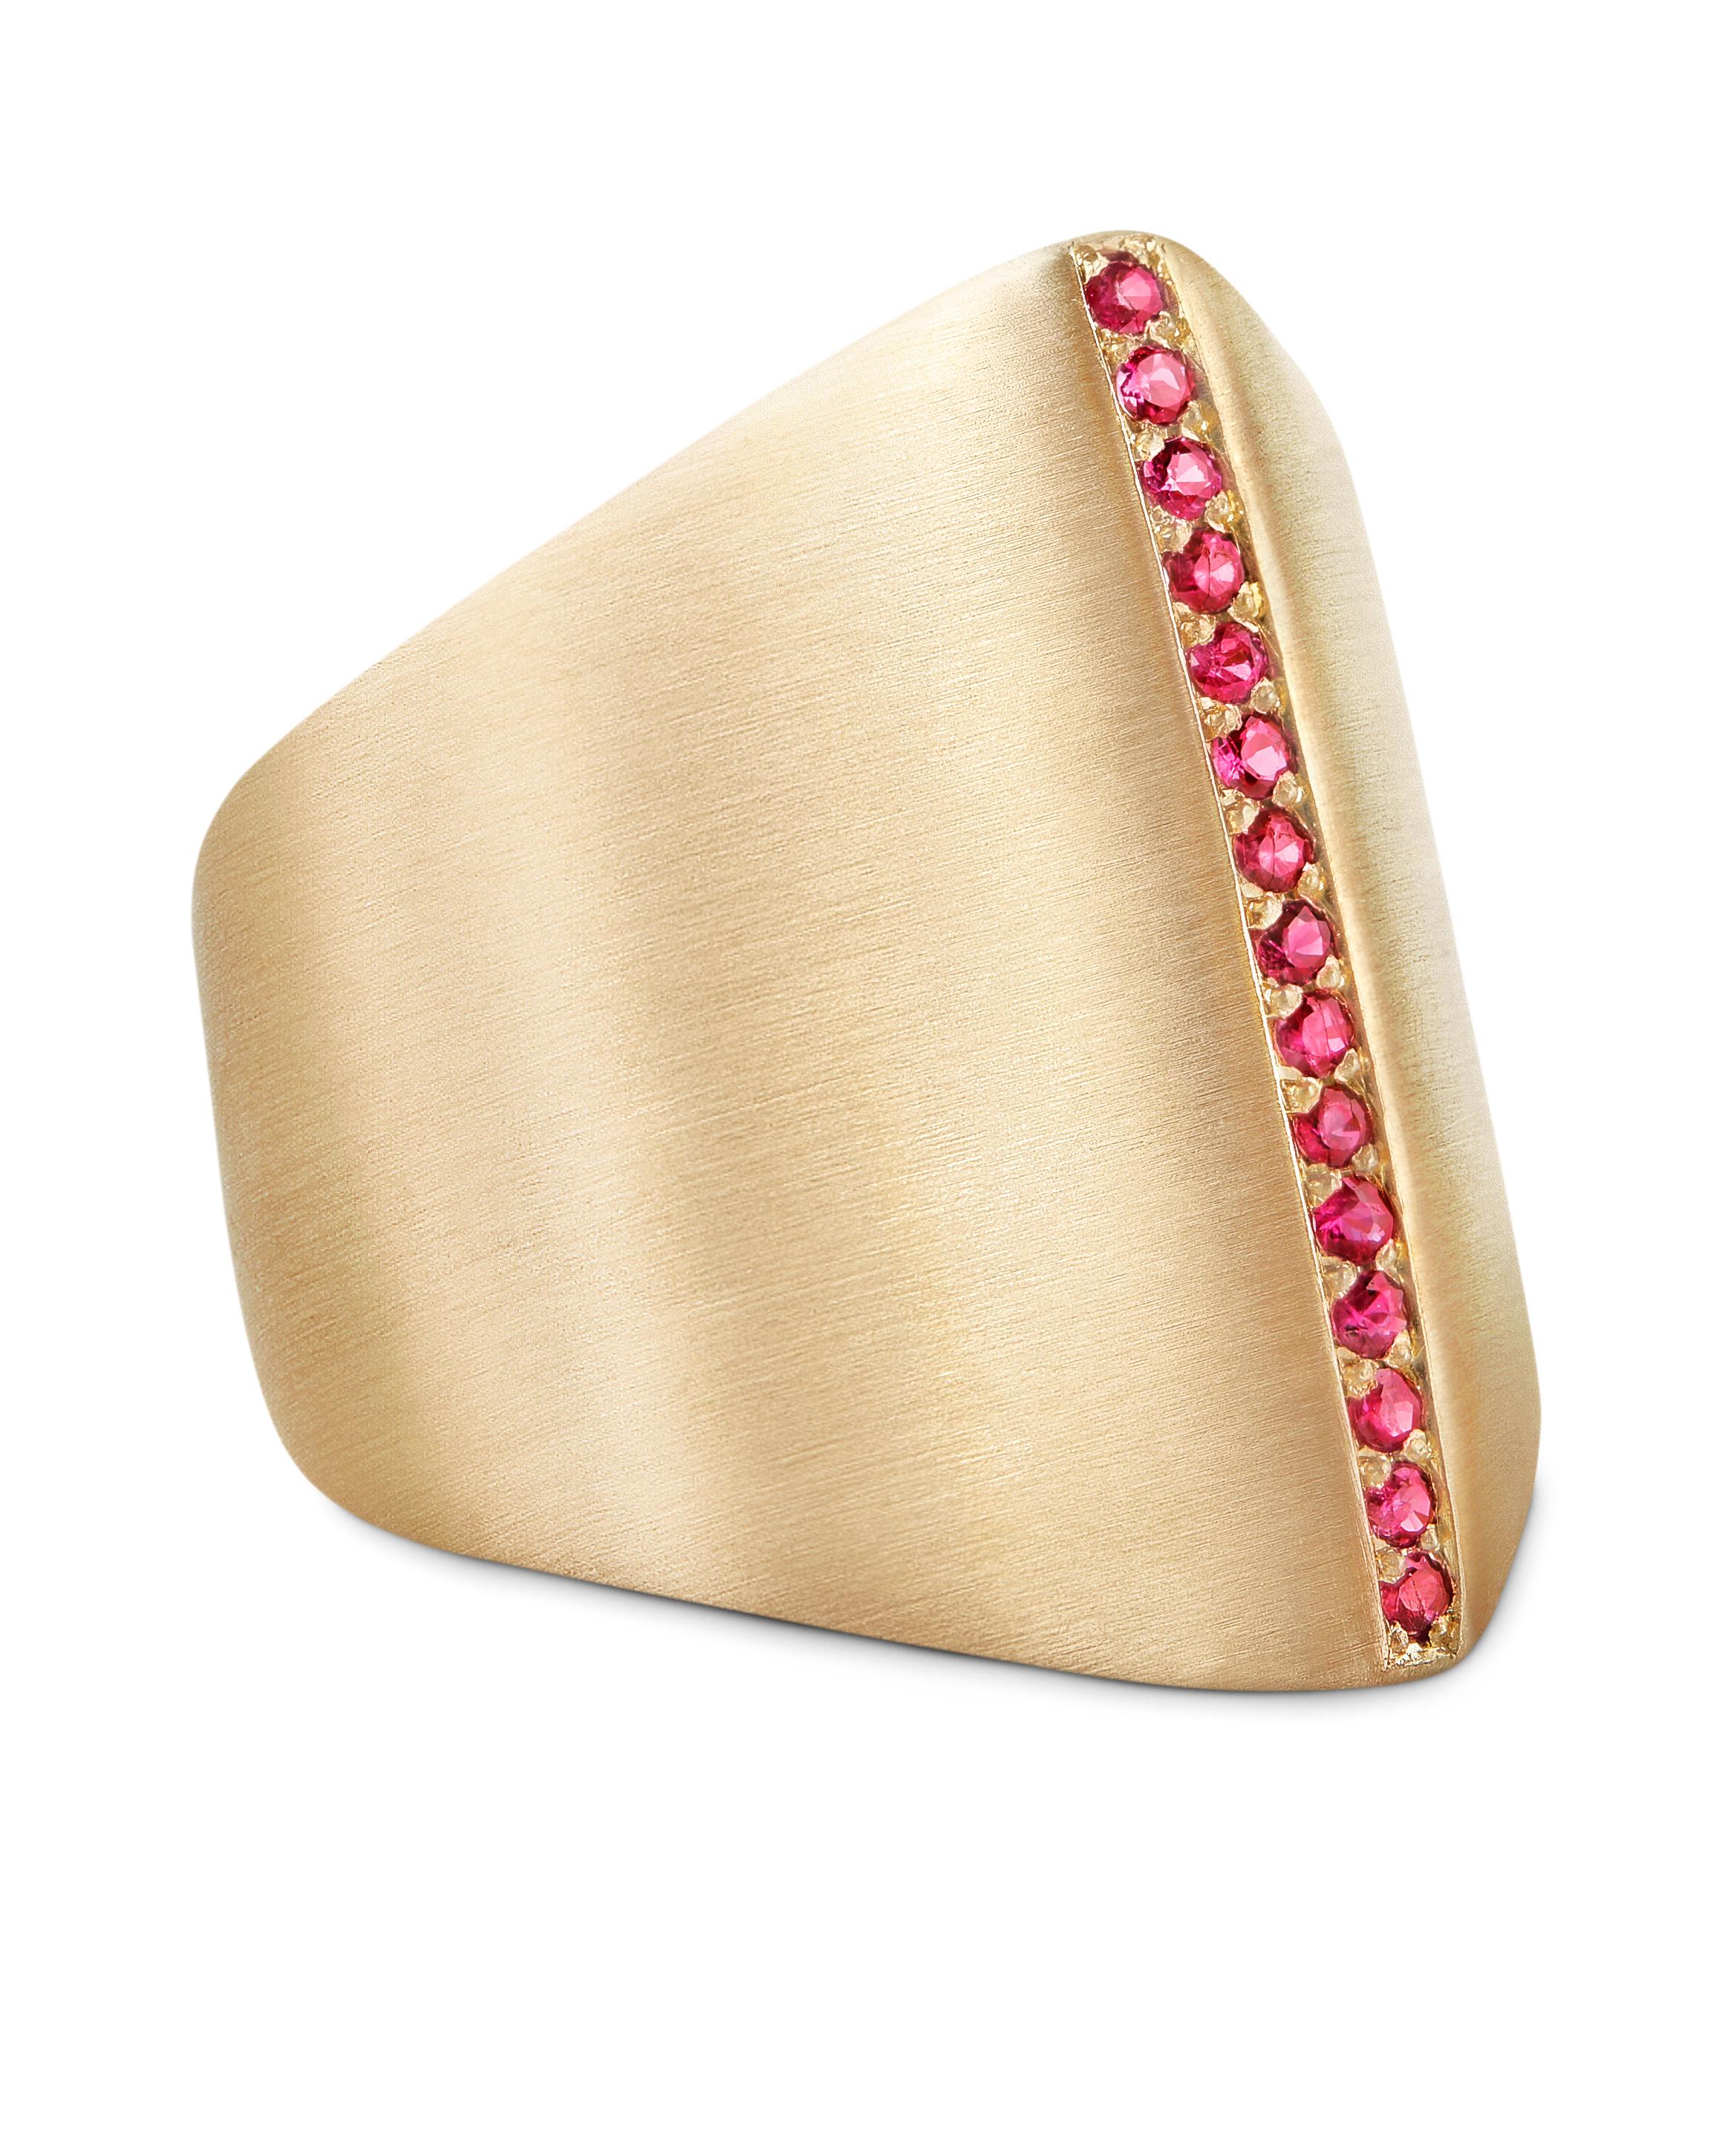 This sculptural ring is cast in solid 14-karat yellow gold and polished to a satin finish.  The ring features a row of fifteen pave-set Sri Lankan rubies for a total of 0.18 carat weight. 
Part of a capsule collection of updated statement rings, the